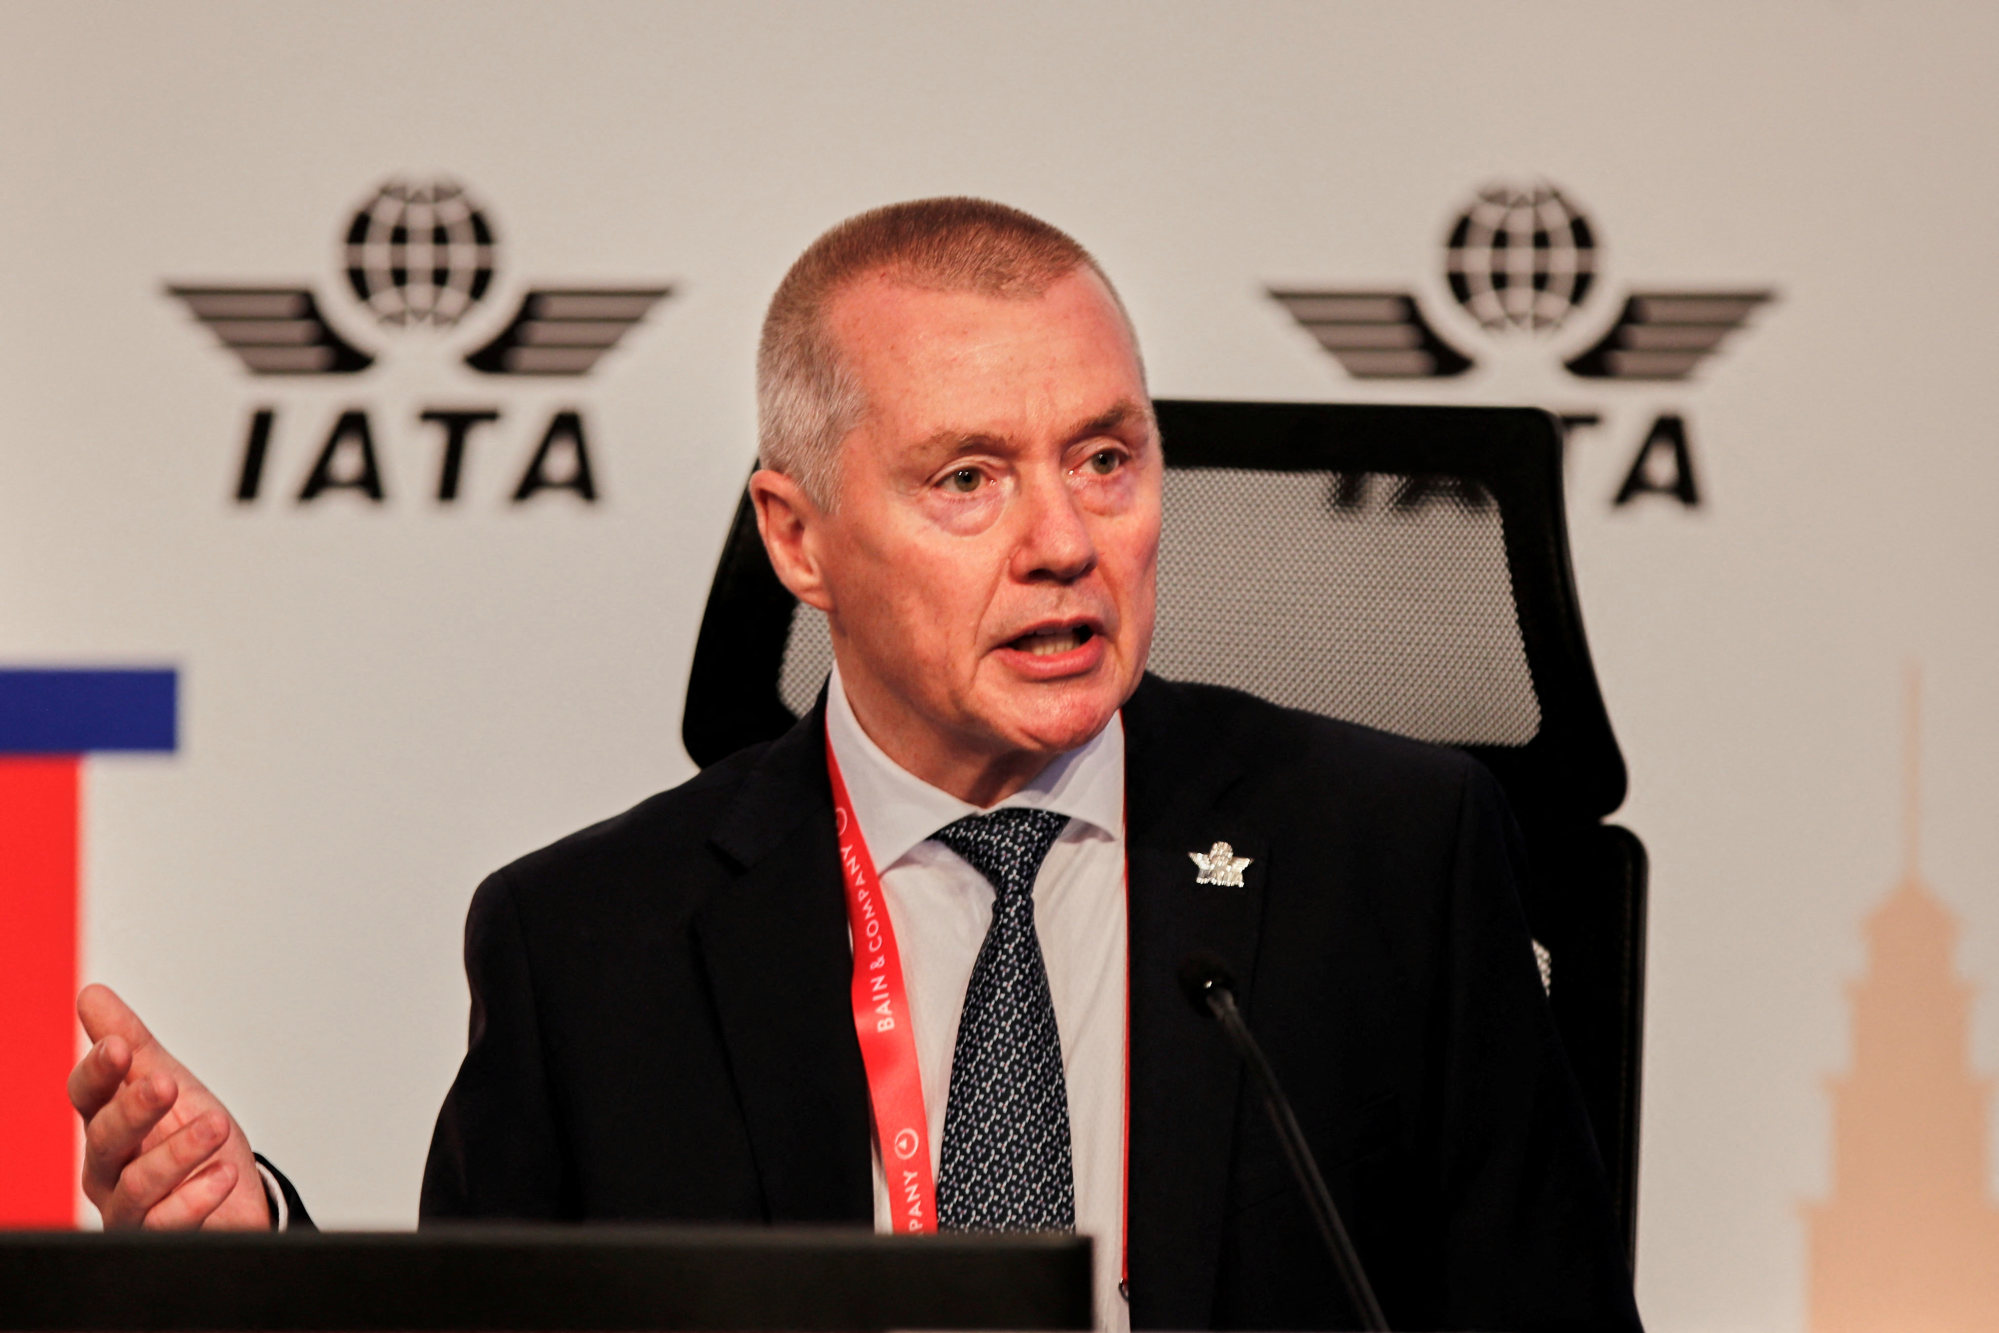 The IATA hopes to see Russian airspace reopen to all airlines, says association chief Willie Walsh. Photo: Reuters